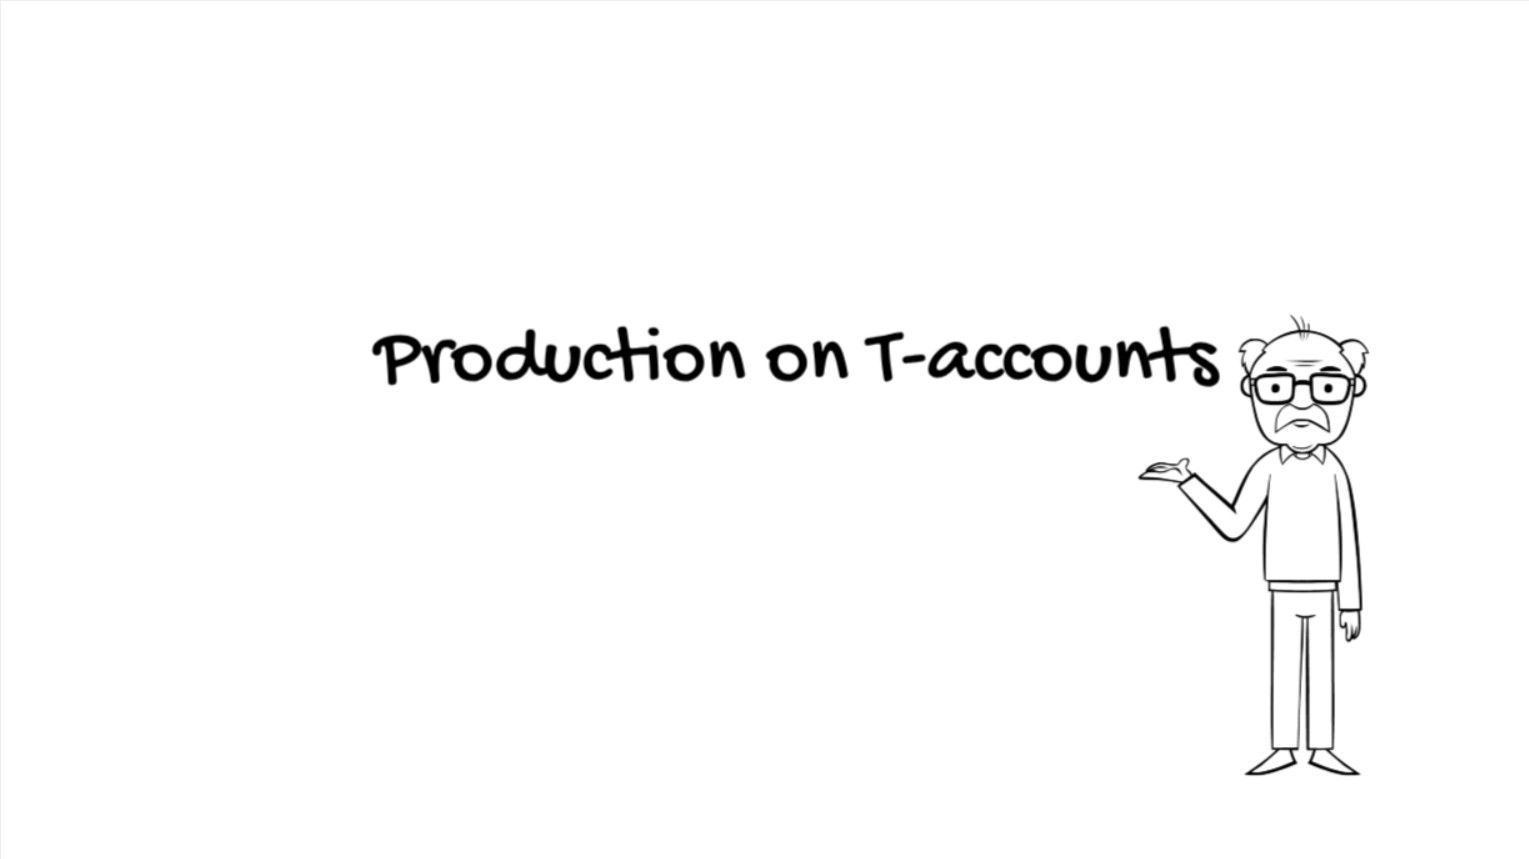 production on t-accounts